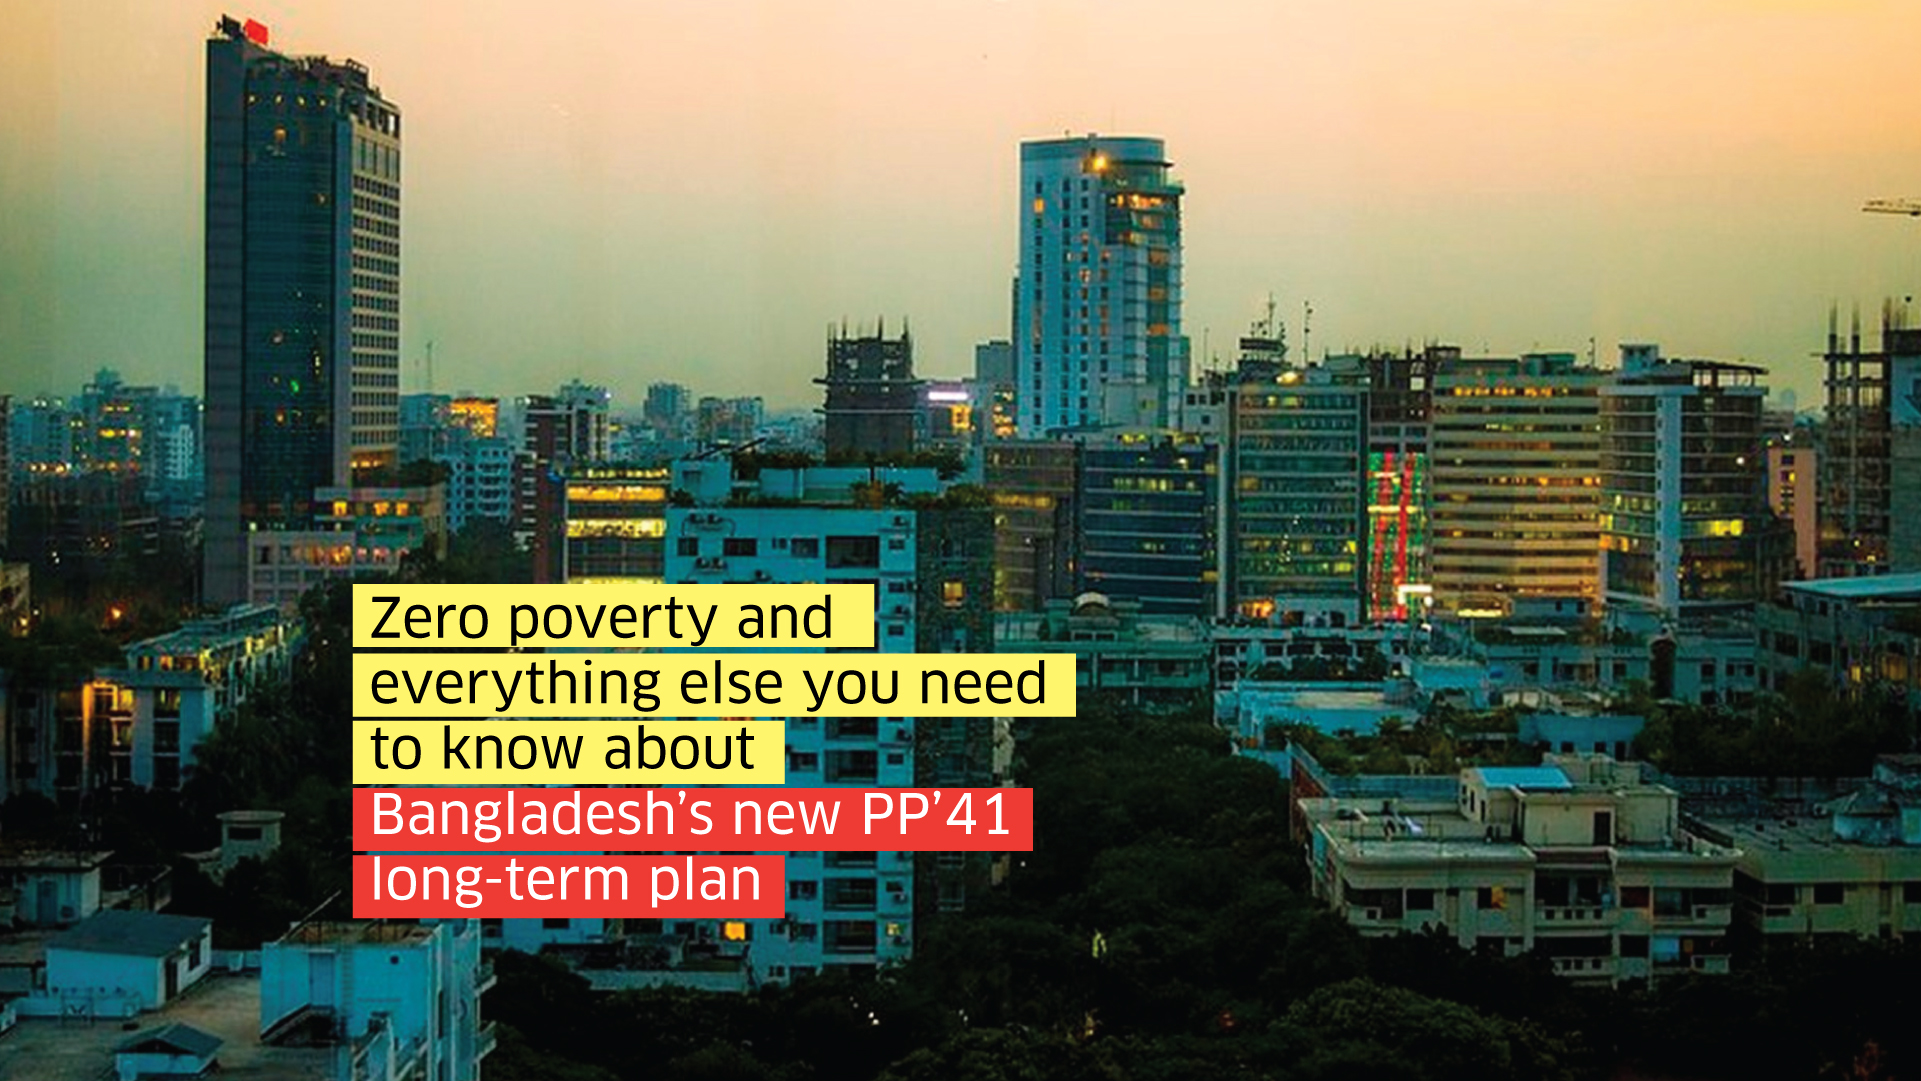 Zero poverty and everything else you need to know about Bangladesh’s new PP’41 long-term plan